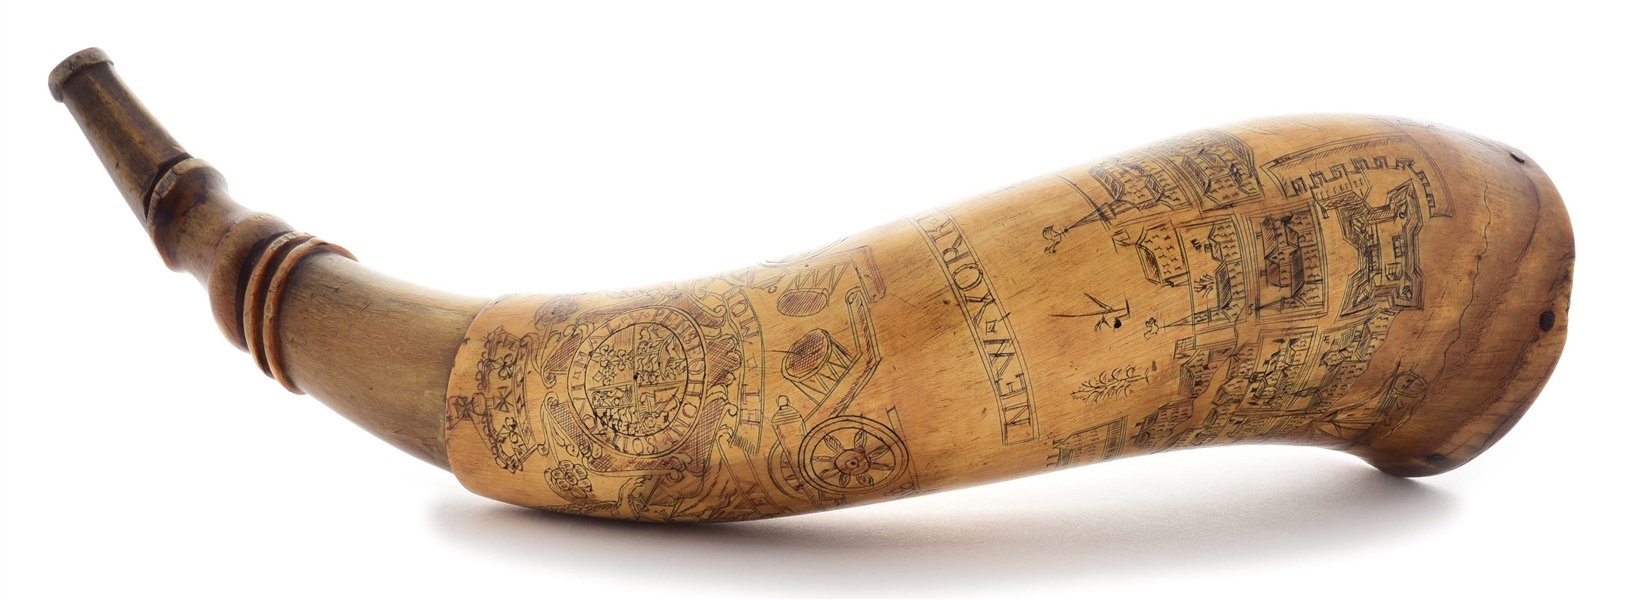 ENGRAVED FRENCH AND INDIAN WAR NEW YORK MAP POWDER HORN, DATED 1758.